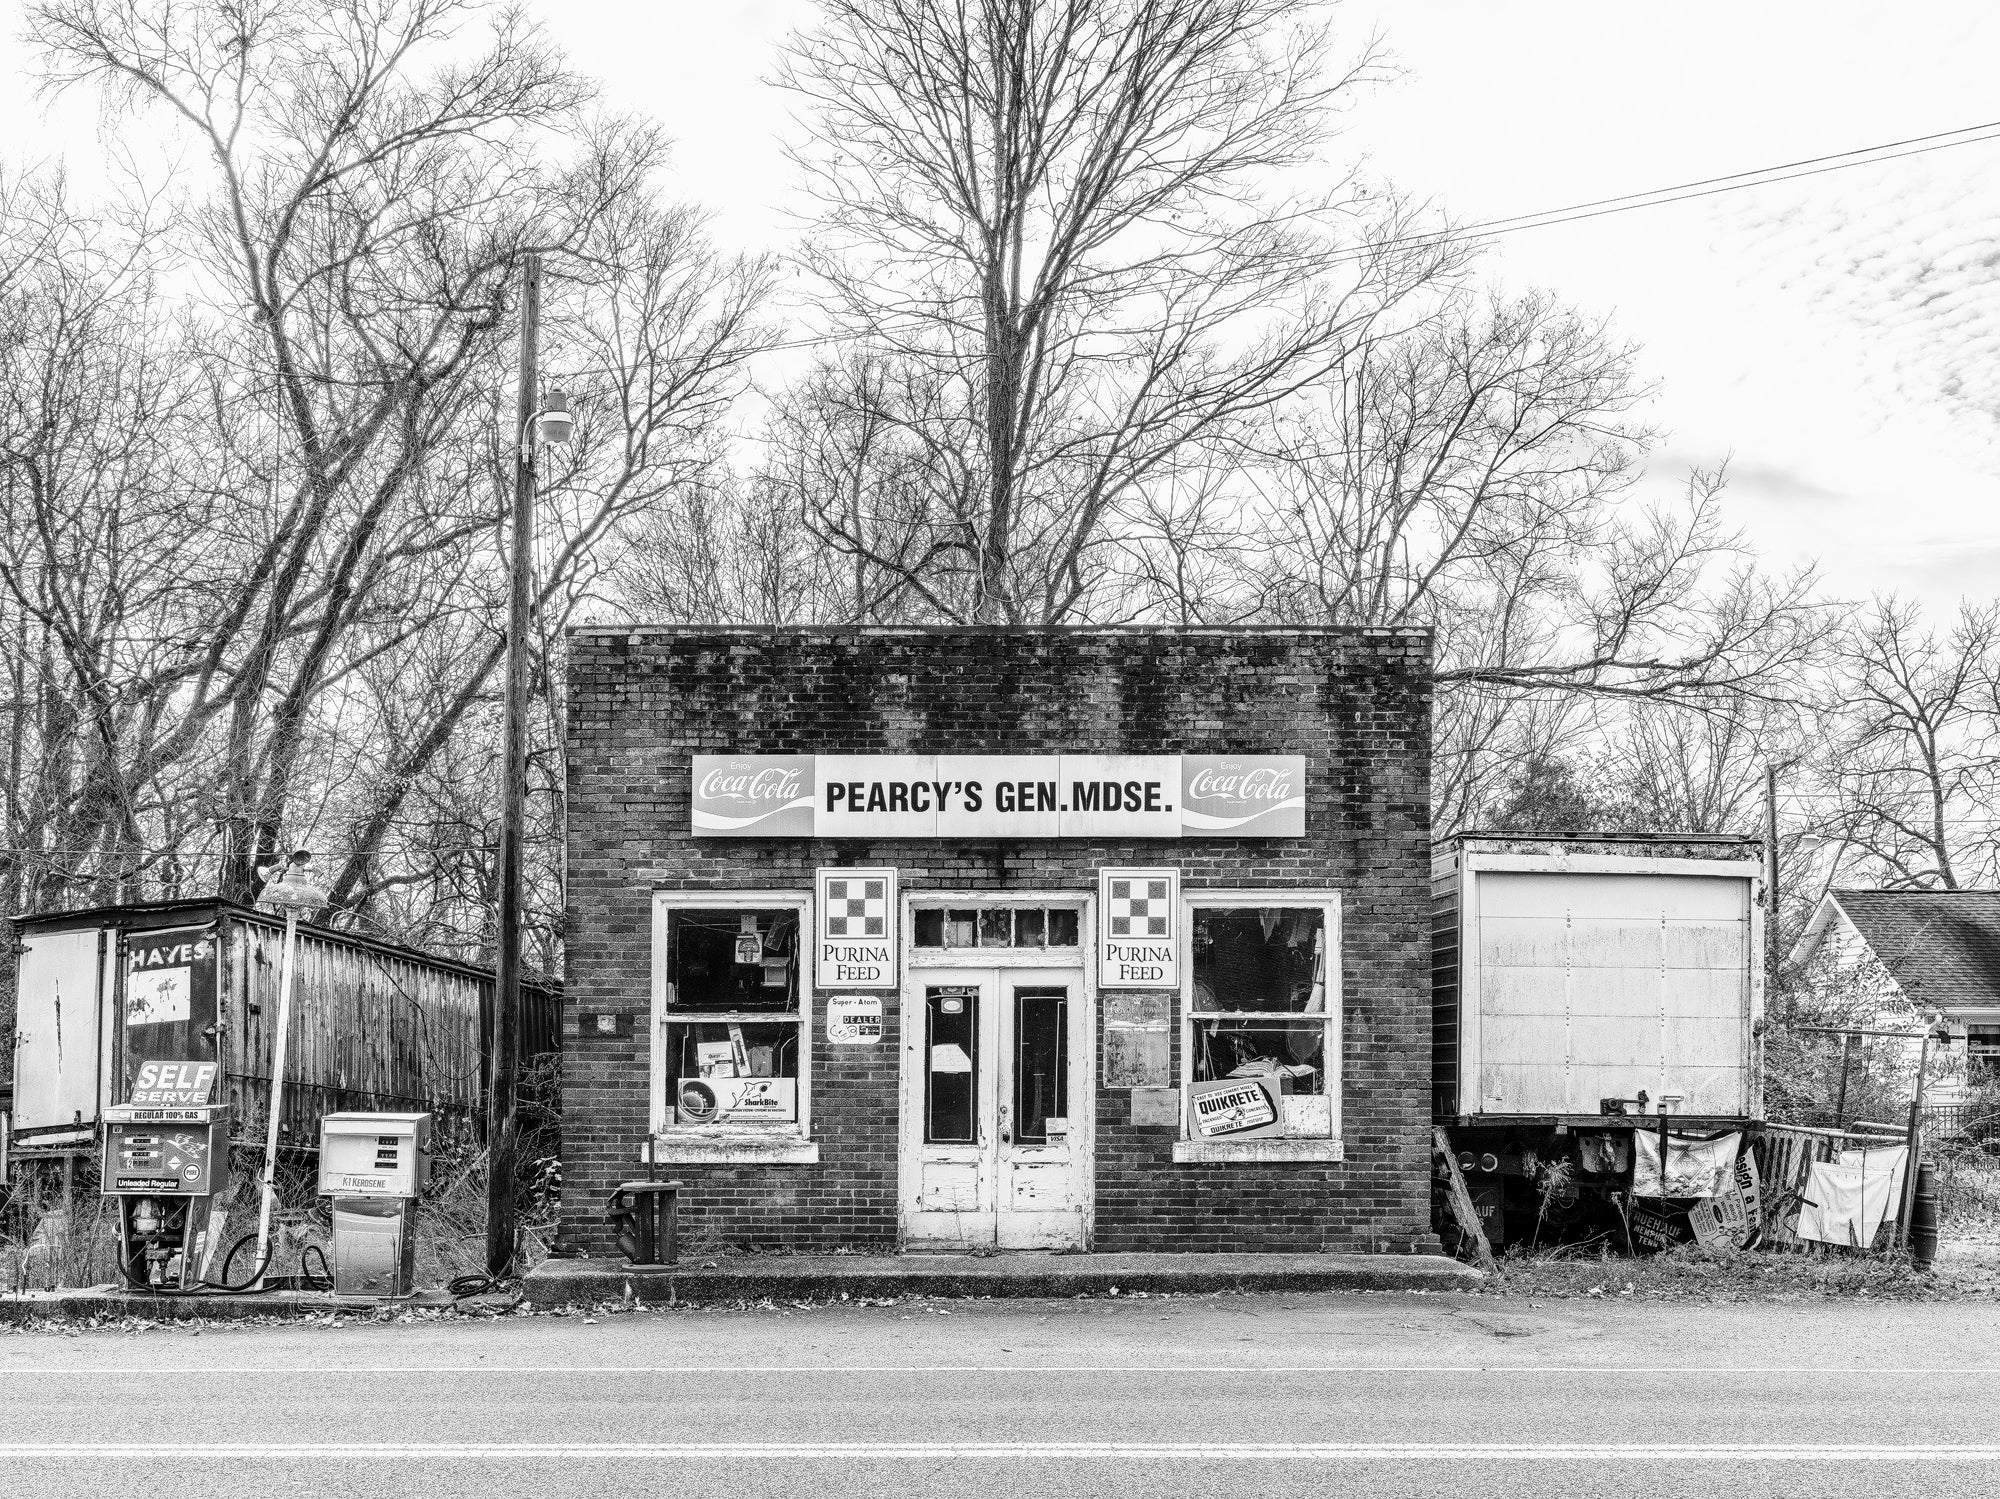 Pearcy's General Merchandise - Black and White Photograph by Keith Dotson. 